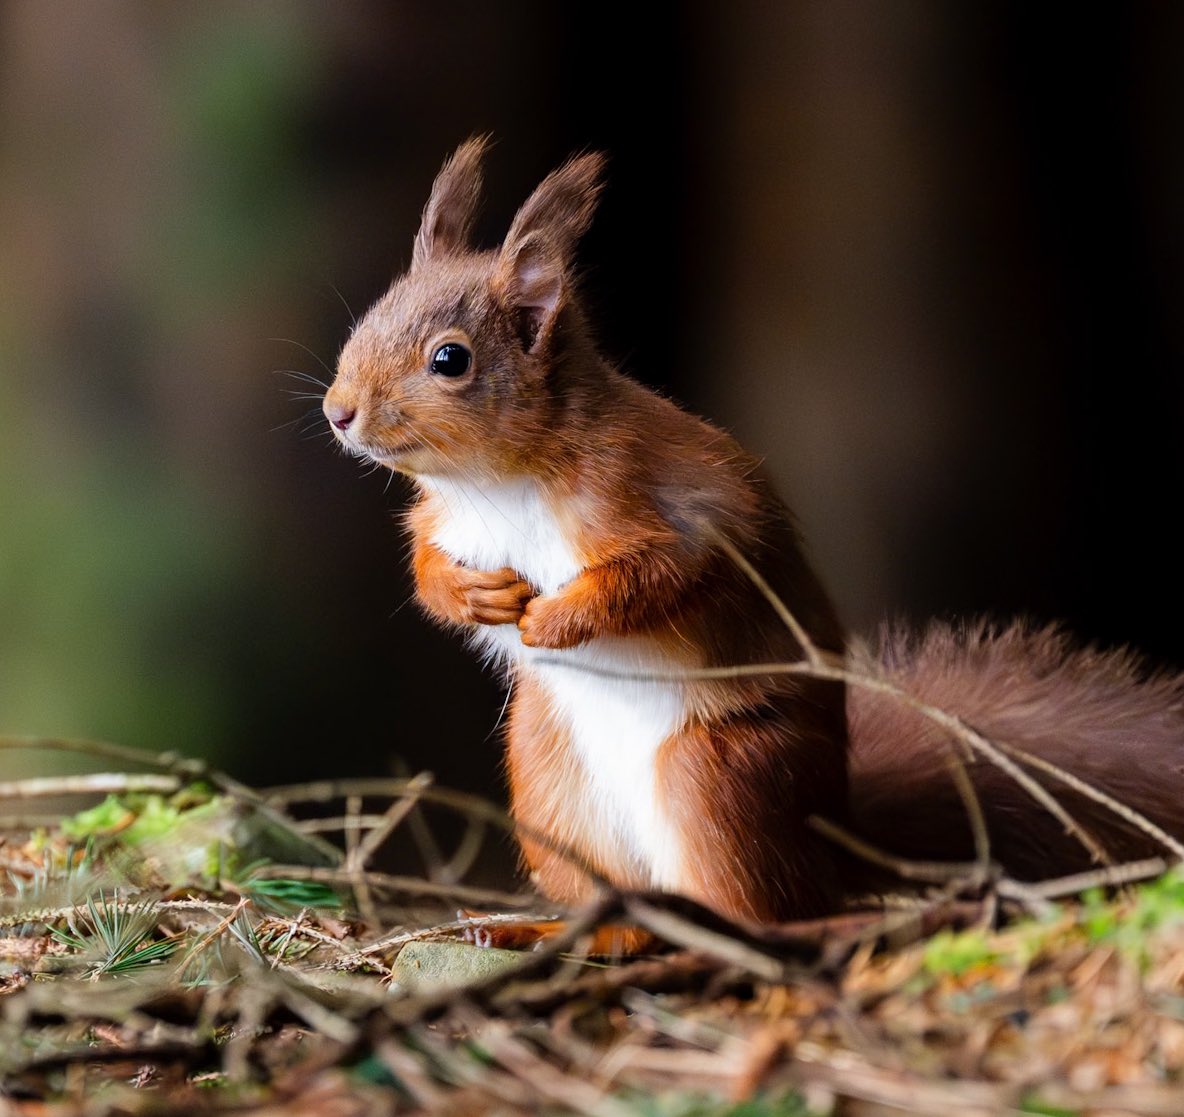 Red squirrels in the forests of the Scottish Borders. A few recent snaps.
#NaturePhotography #redsquirrel